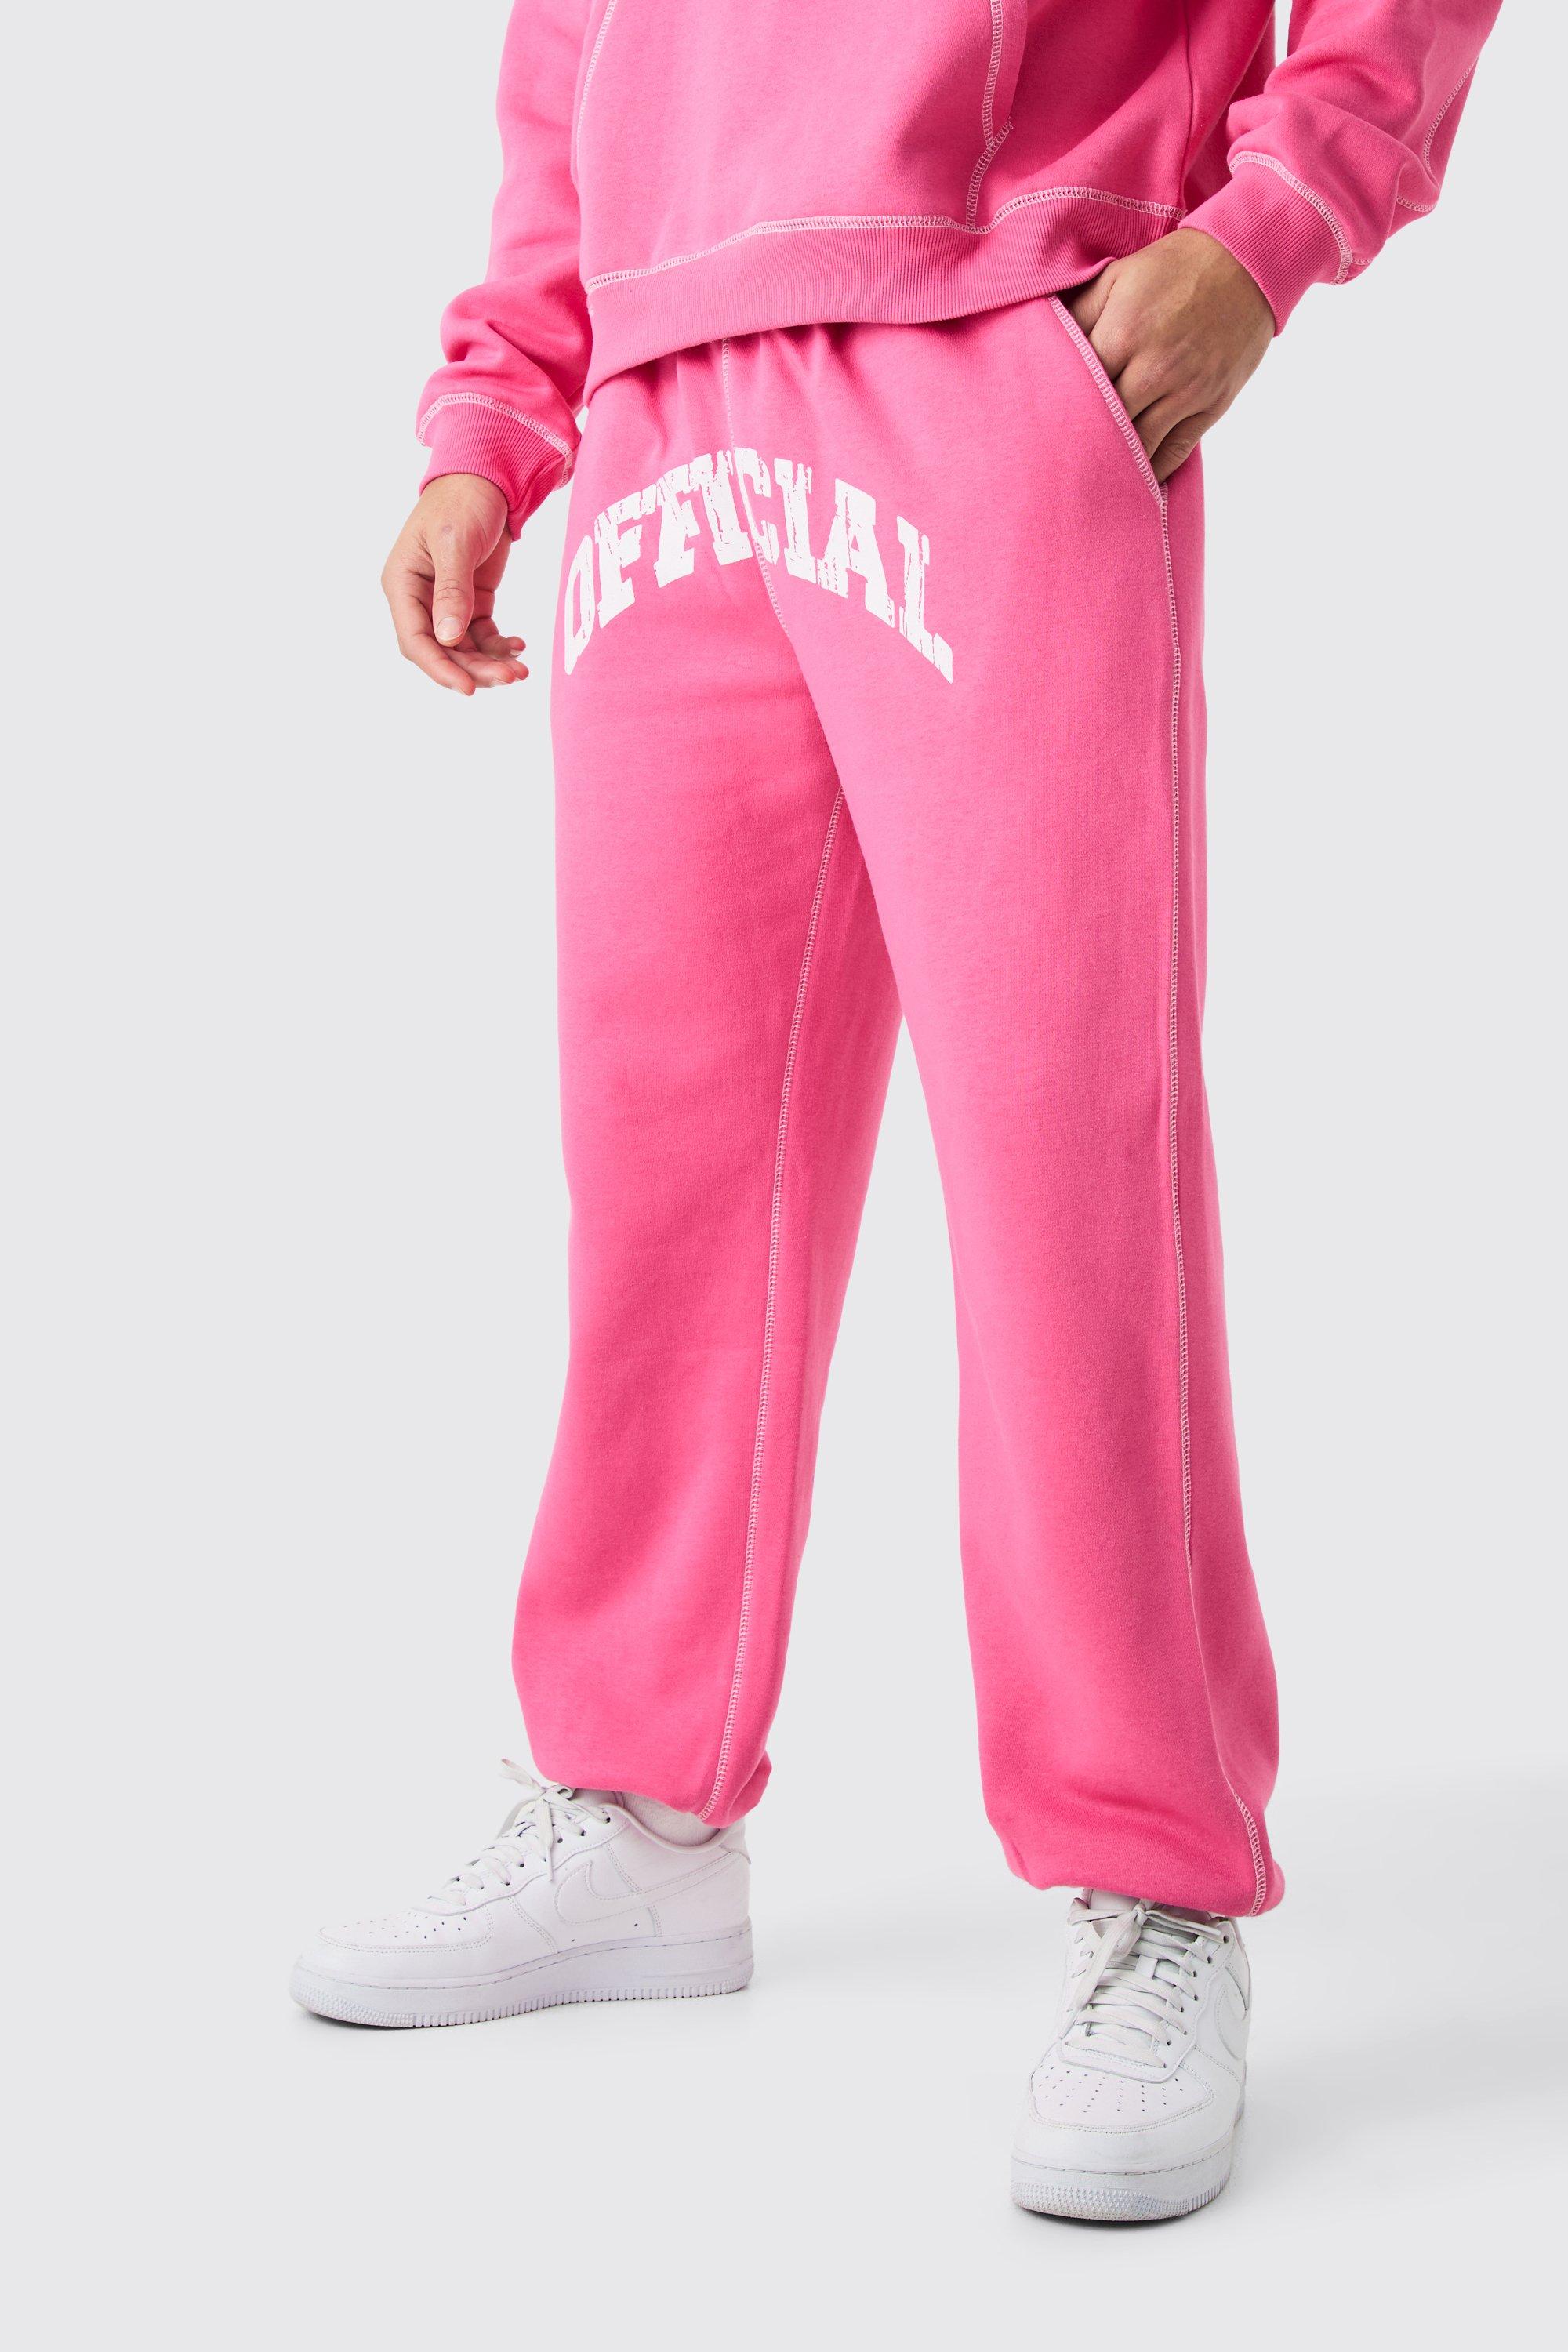 Image of Oversized Official Contrast Stitch Jogger, Pink